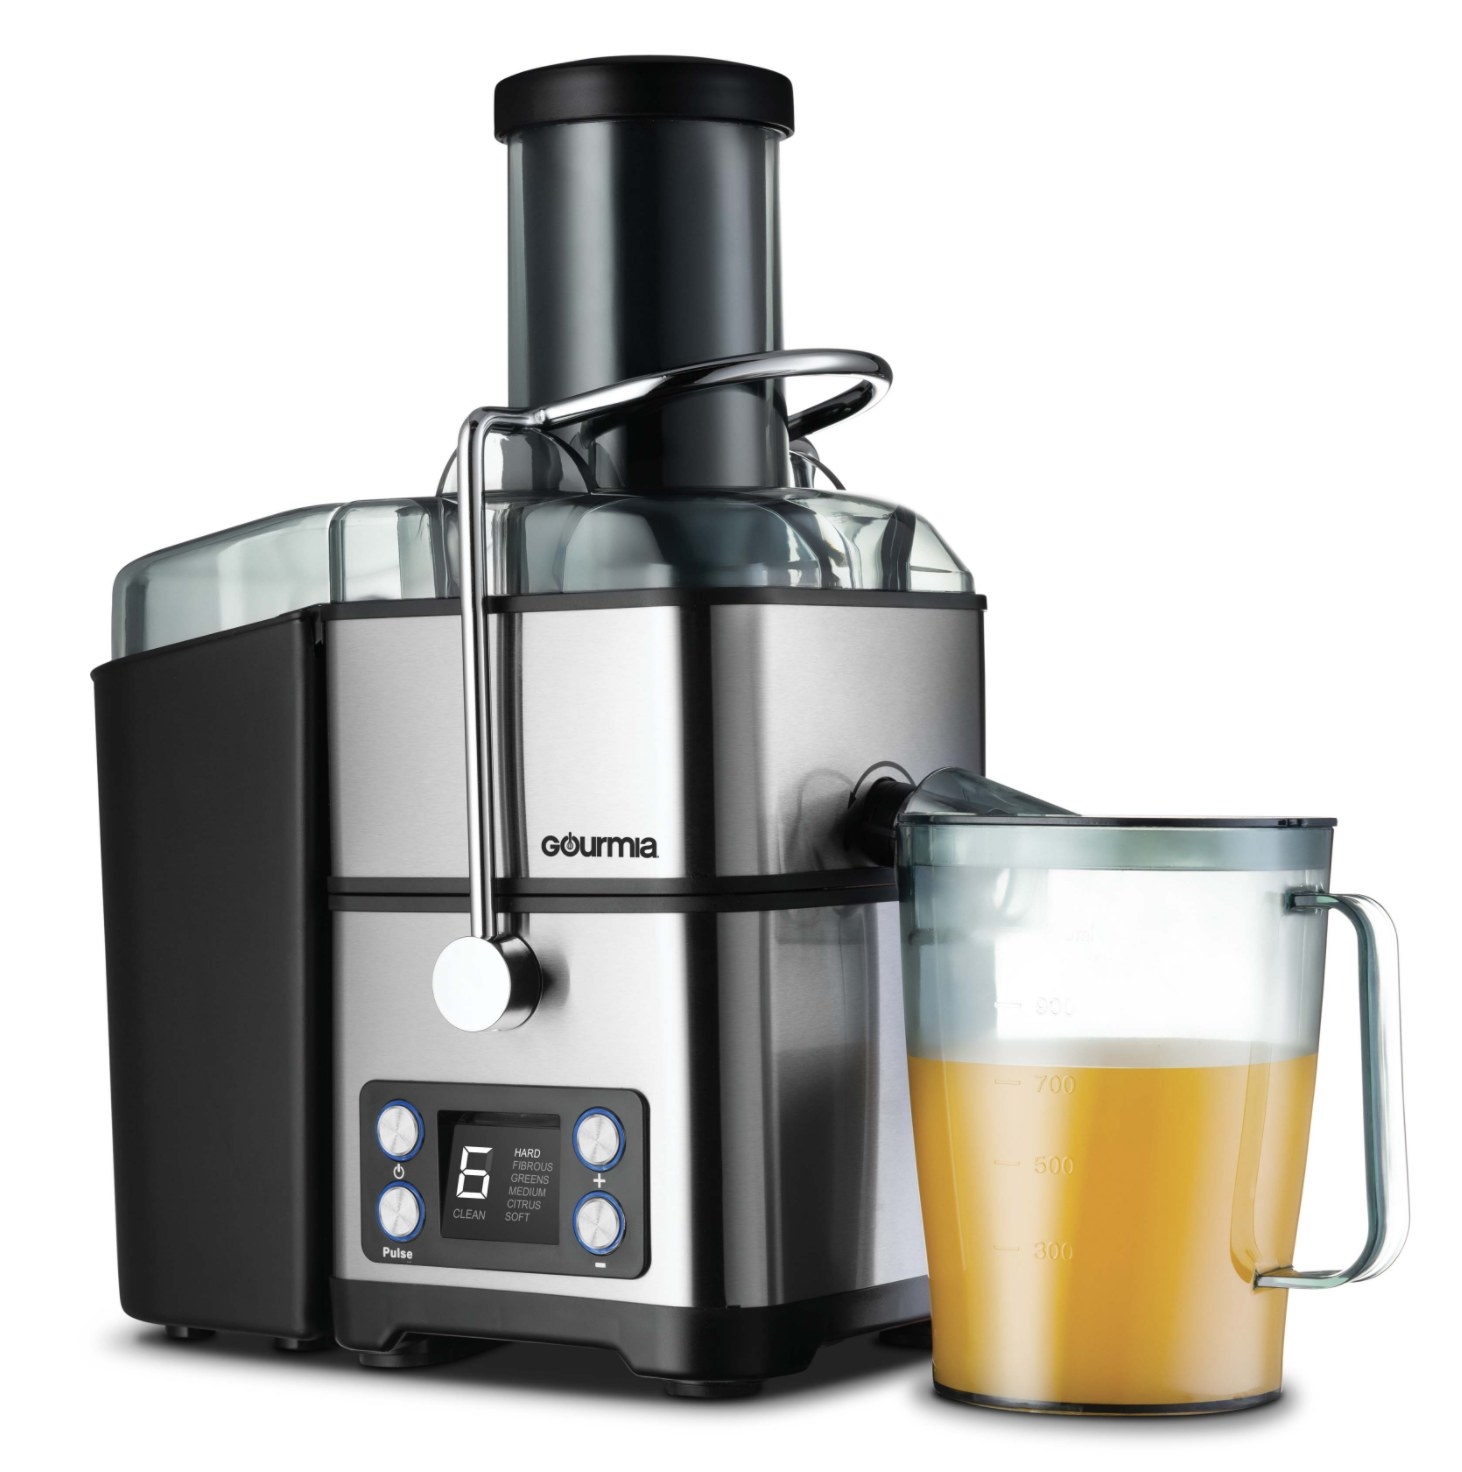 the juicer with a carafe of orange juice next to it